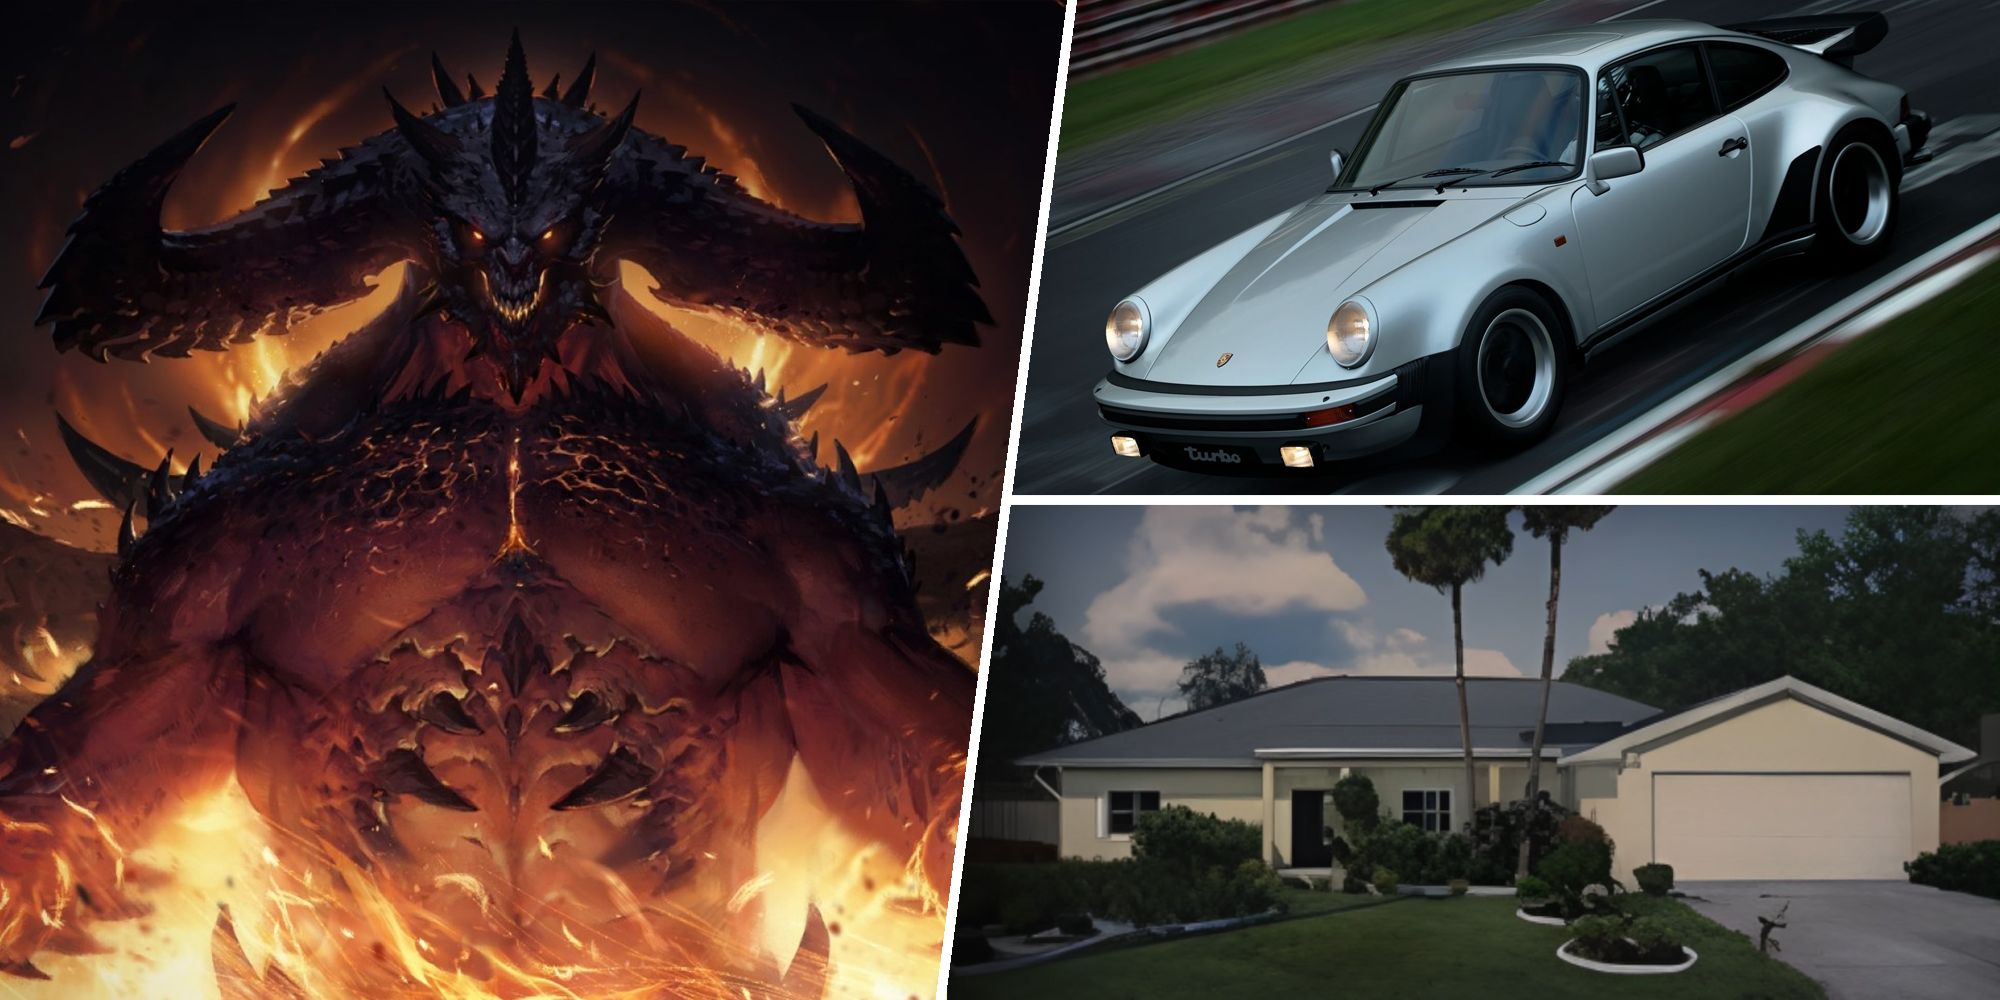 Diablo Immortal promotional artwork, a Porsche 911 from GTSport and an image from GTA